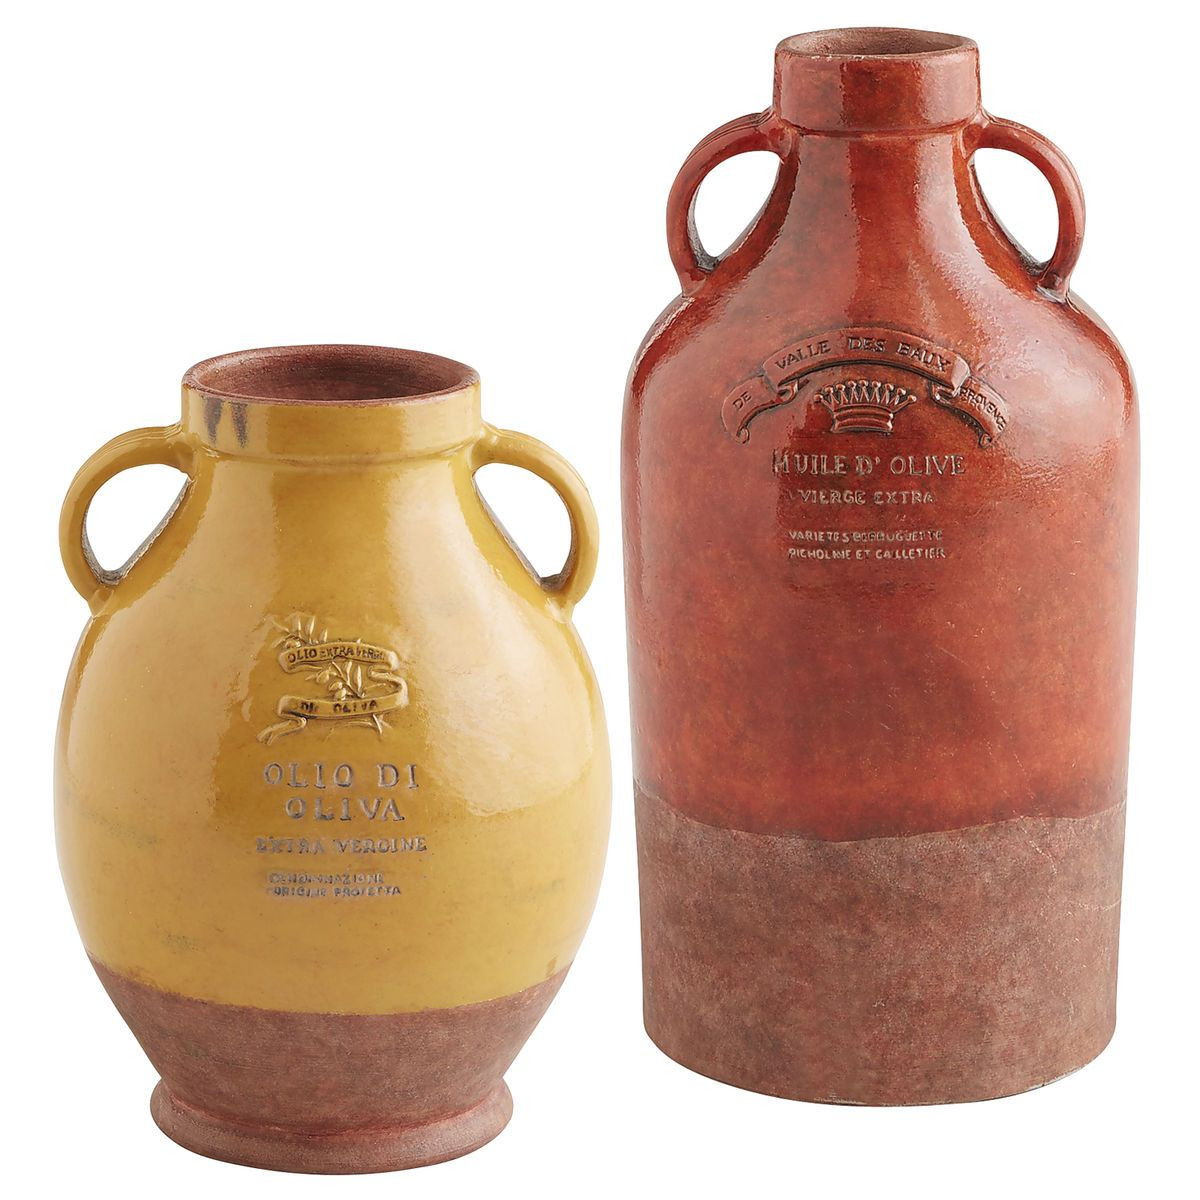 29 Nice Pottery Barn Tuscan Terracotta Vases 2024 free download pottery barn tuscan terracotta vases of terracotta olio vases pier 1 imports client raquel pinterest intended for terracotta olio vases pier 1 imports